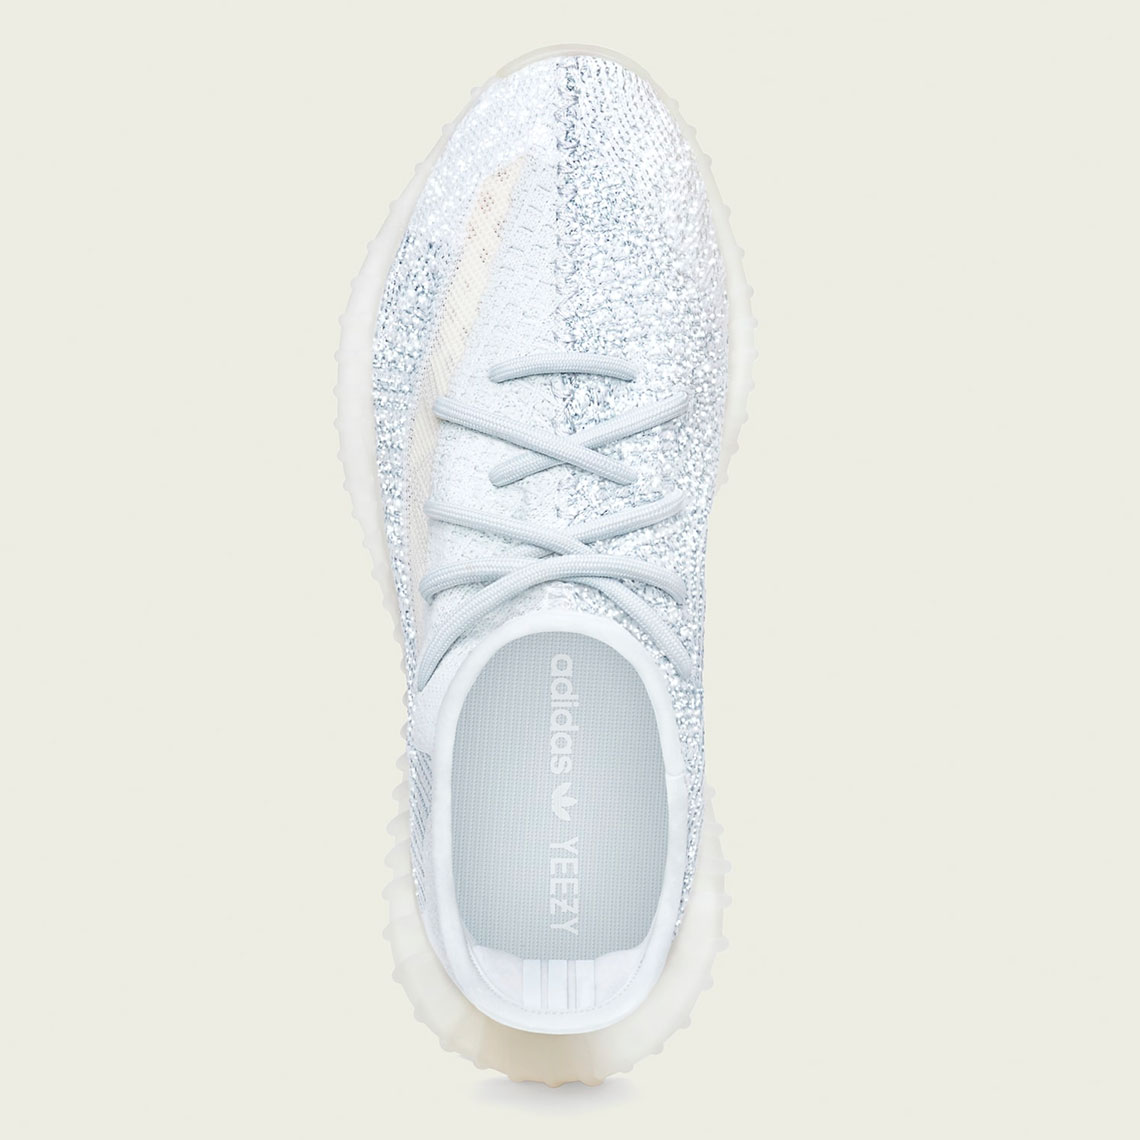 adidas Yeezy Boost 350 v2 Cloud White Reflective FW5317 Release 